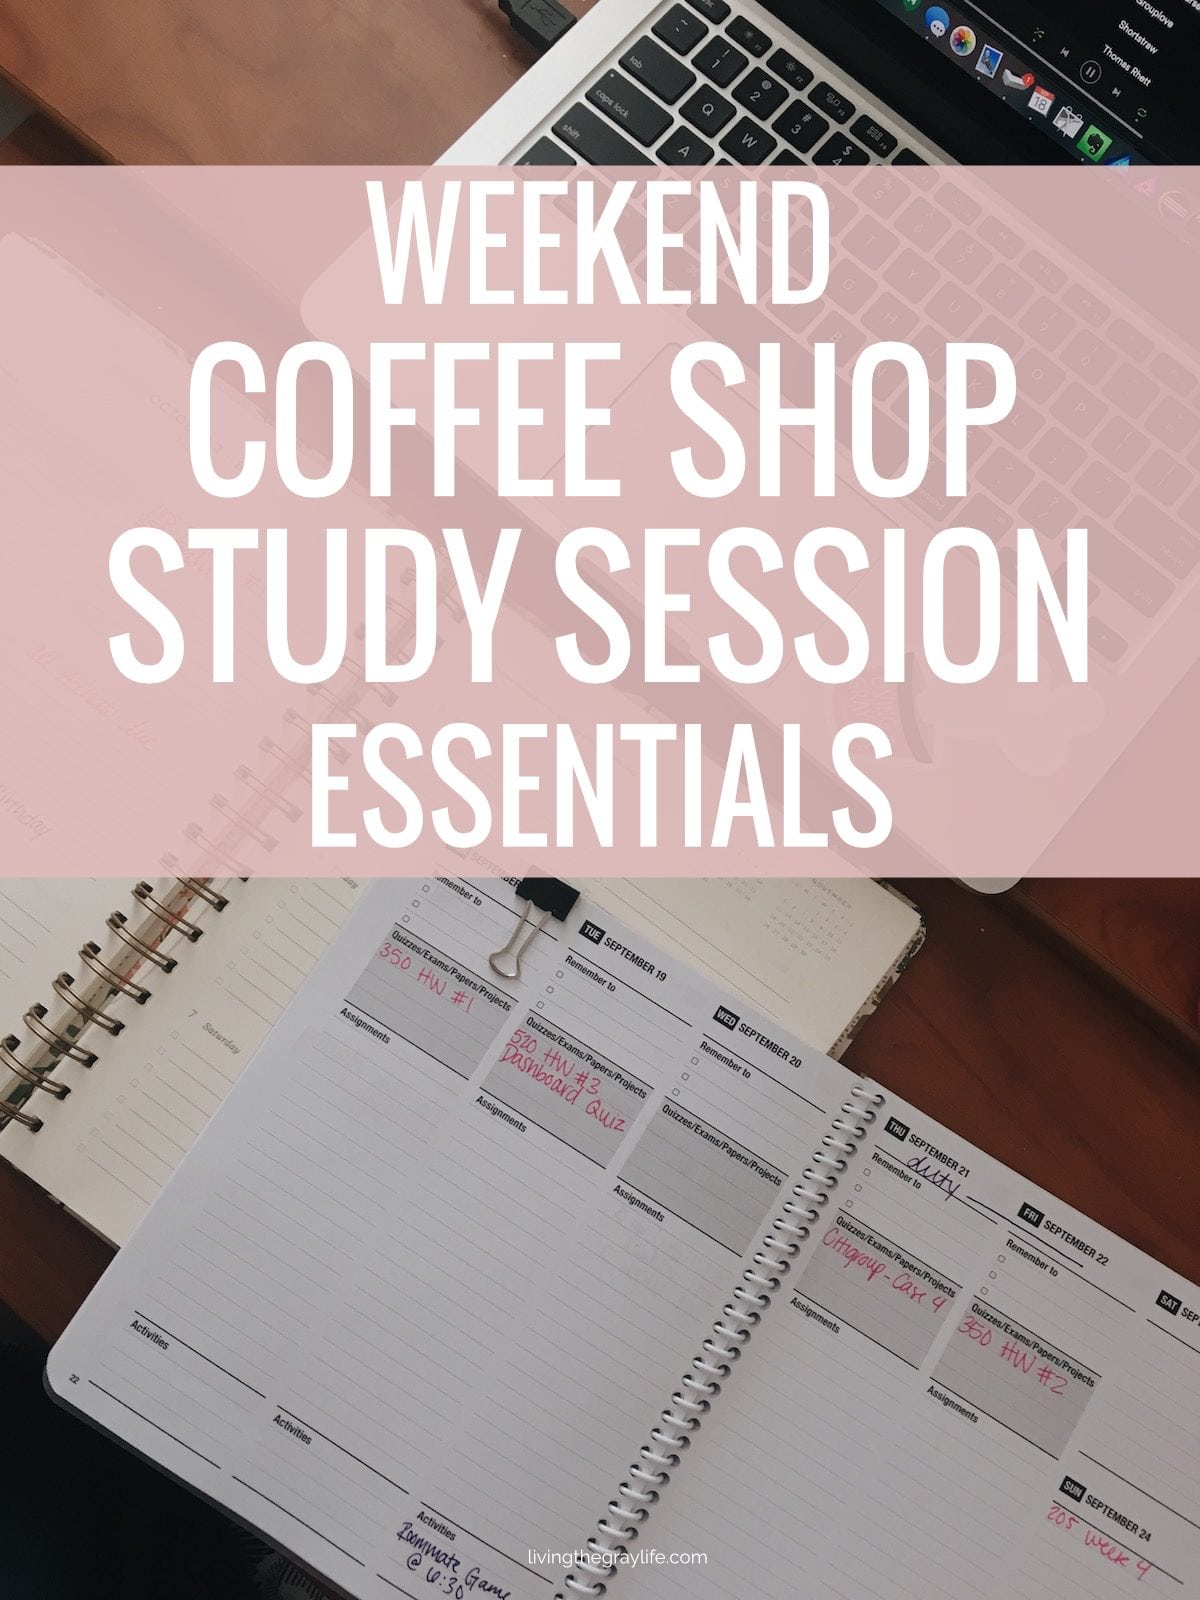 What You Need to Survive the Weekend Coffee Shop Study Session